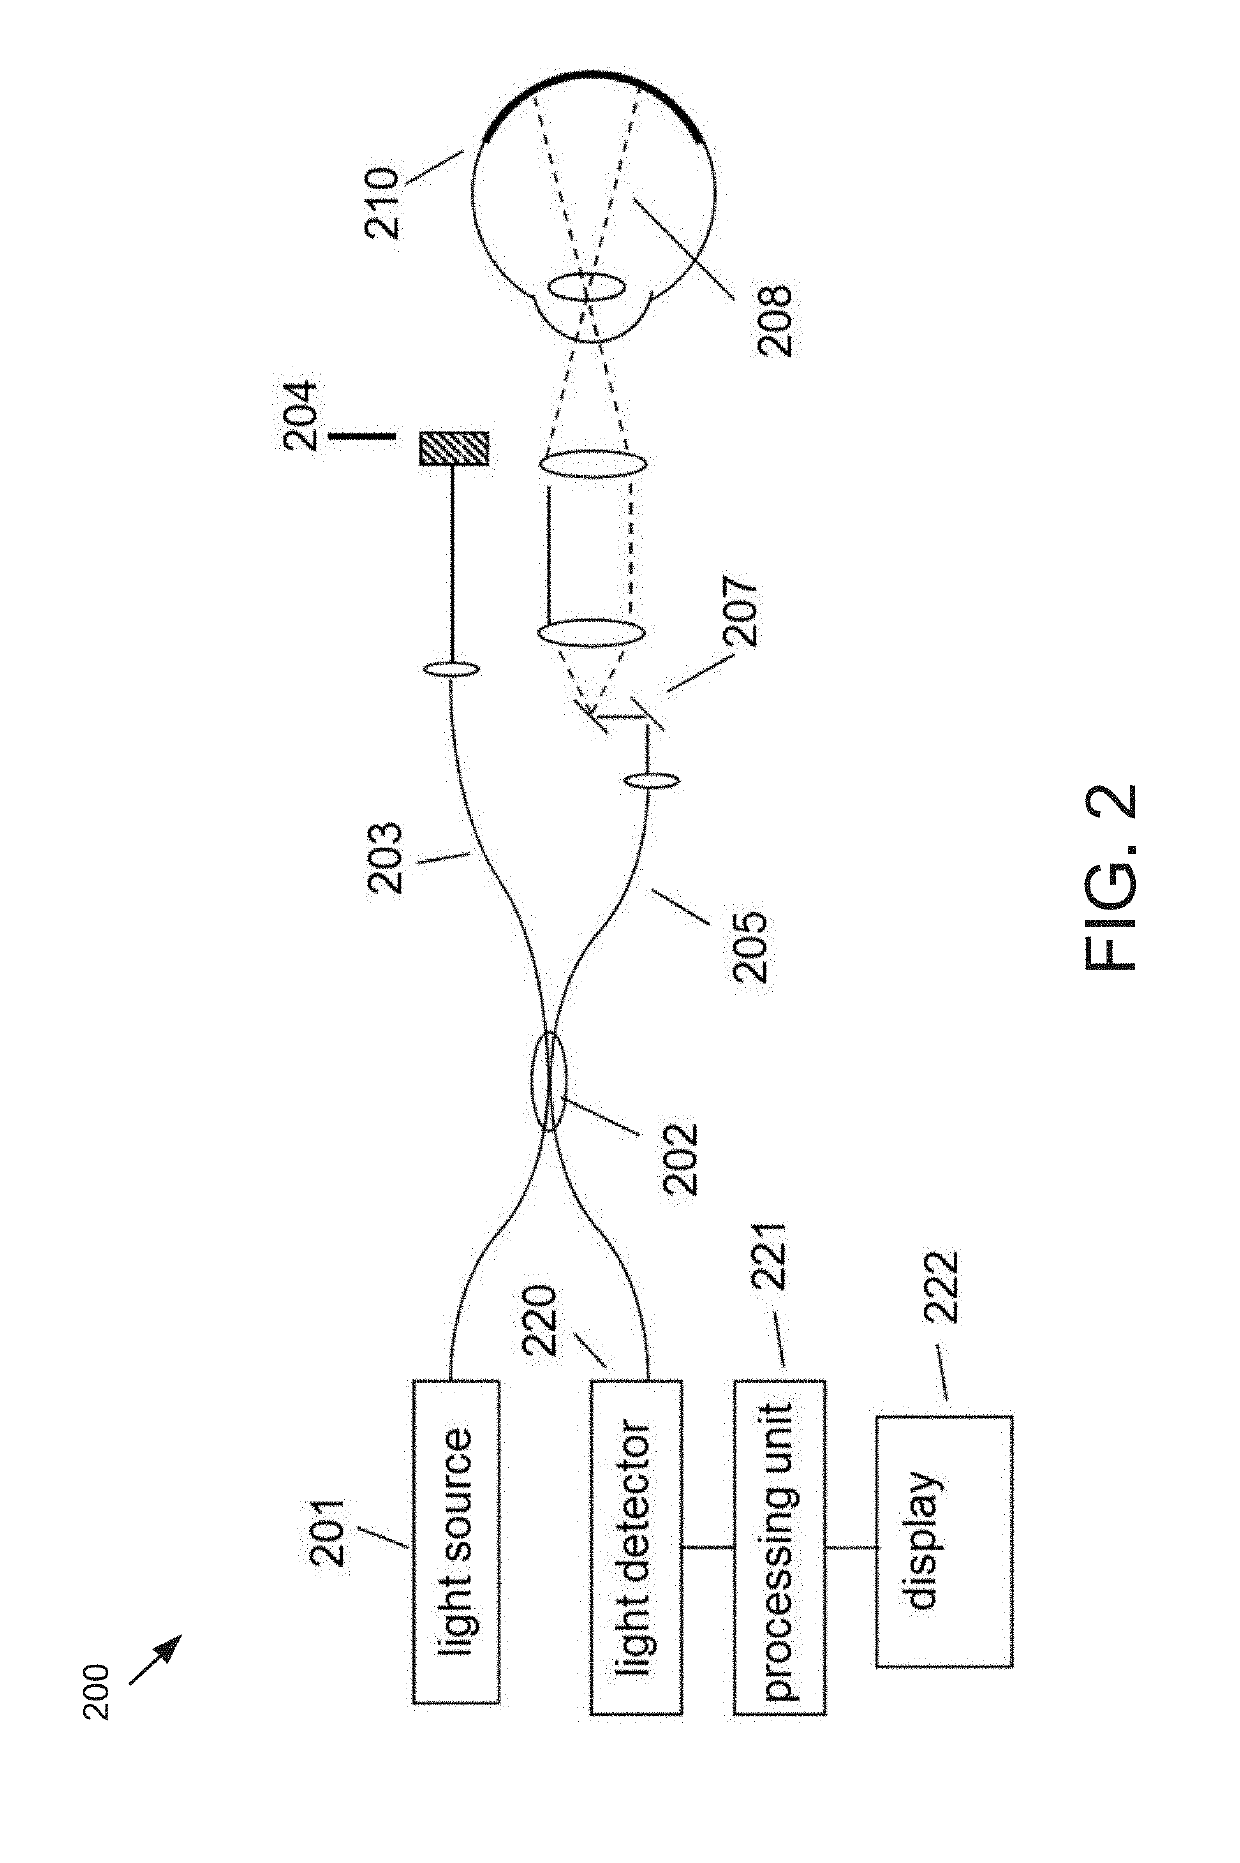 Methods and systems to detect and classify retinal structures in interferometric imaging data